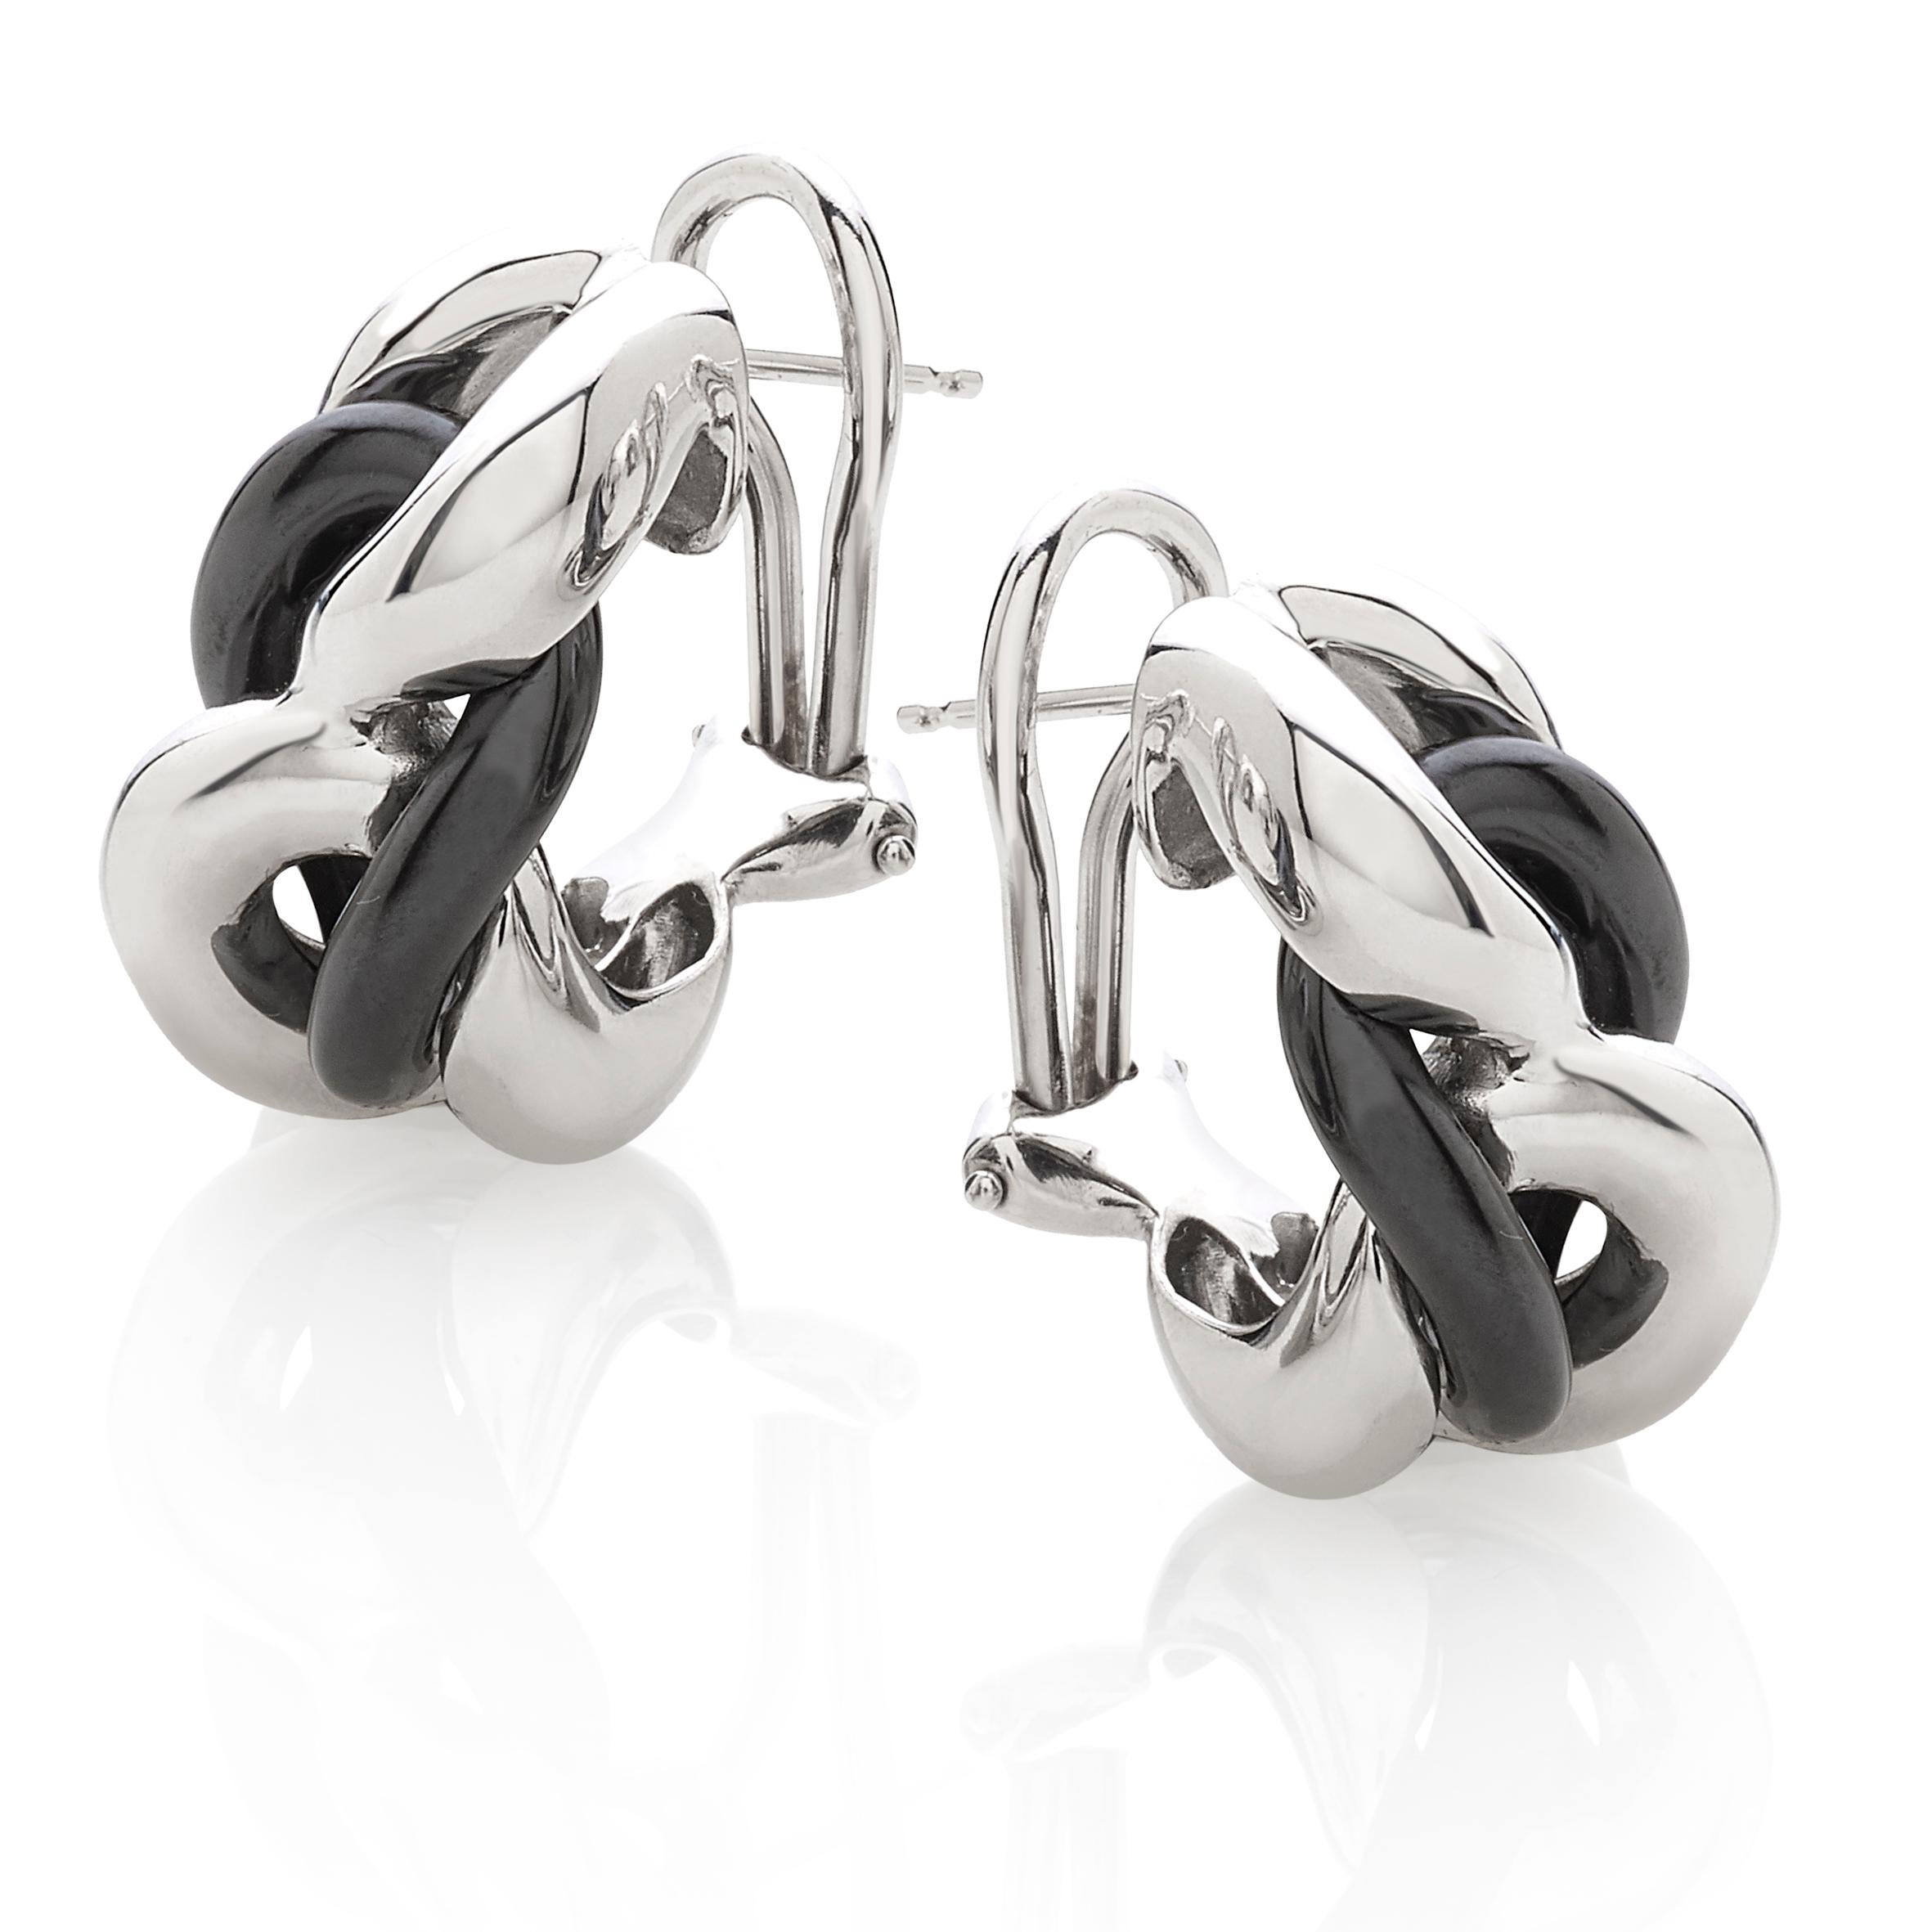 Black ceramic groumette pair of earrings in 18 kt white gold
The ceramic is a very resistant material. 
This iconic collection in Micheletto tradition was originally made only in gold just more or less 10 years ago it became very popular the ceramic